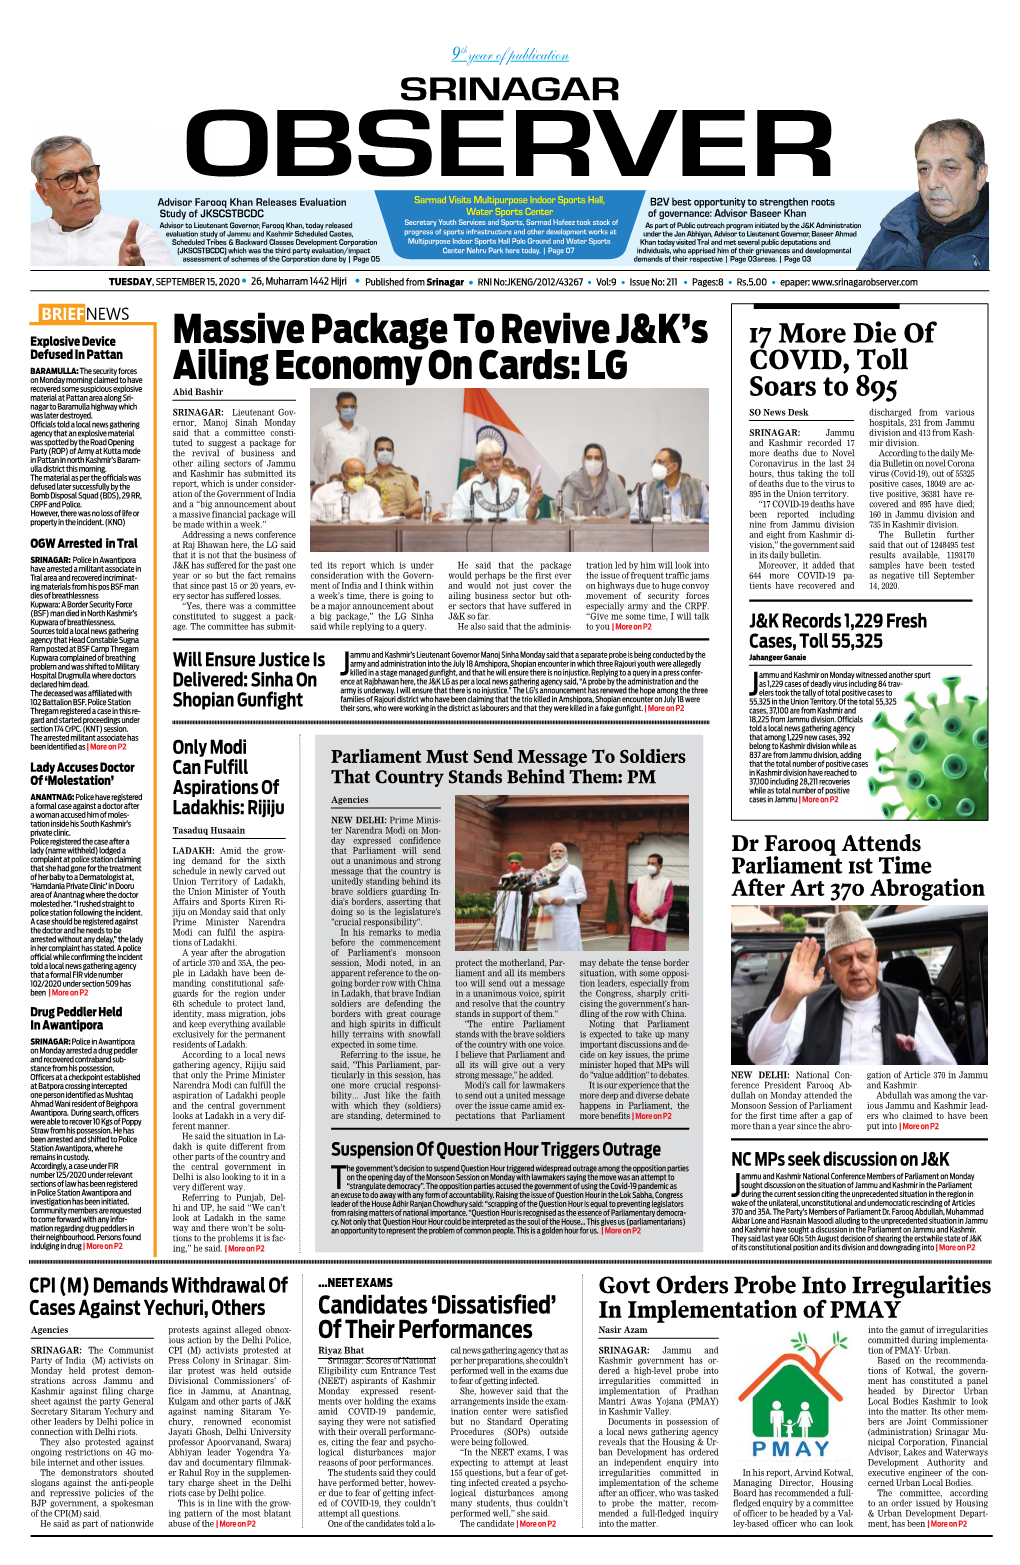 Massive Package to Revive J&K's Ailing Economy